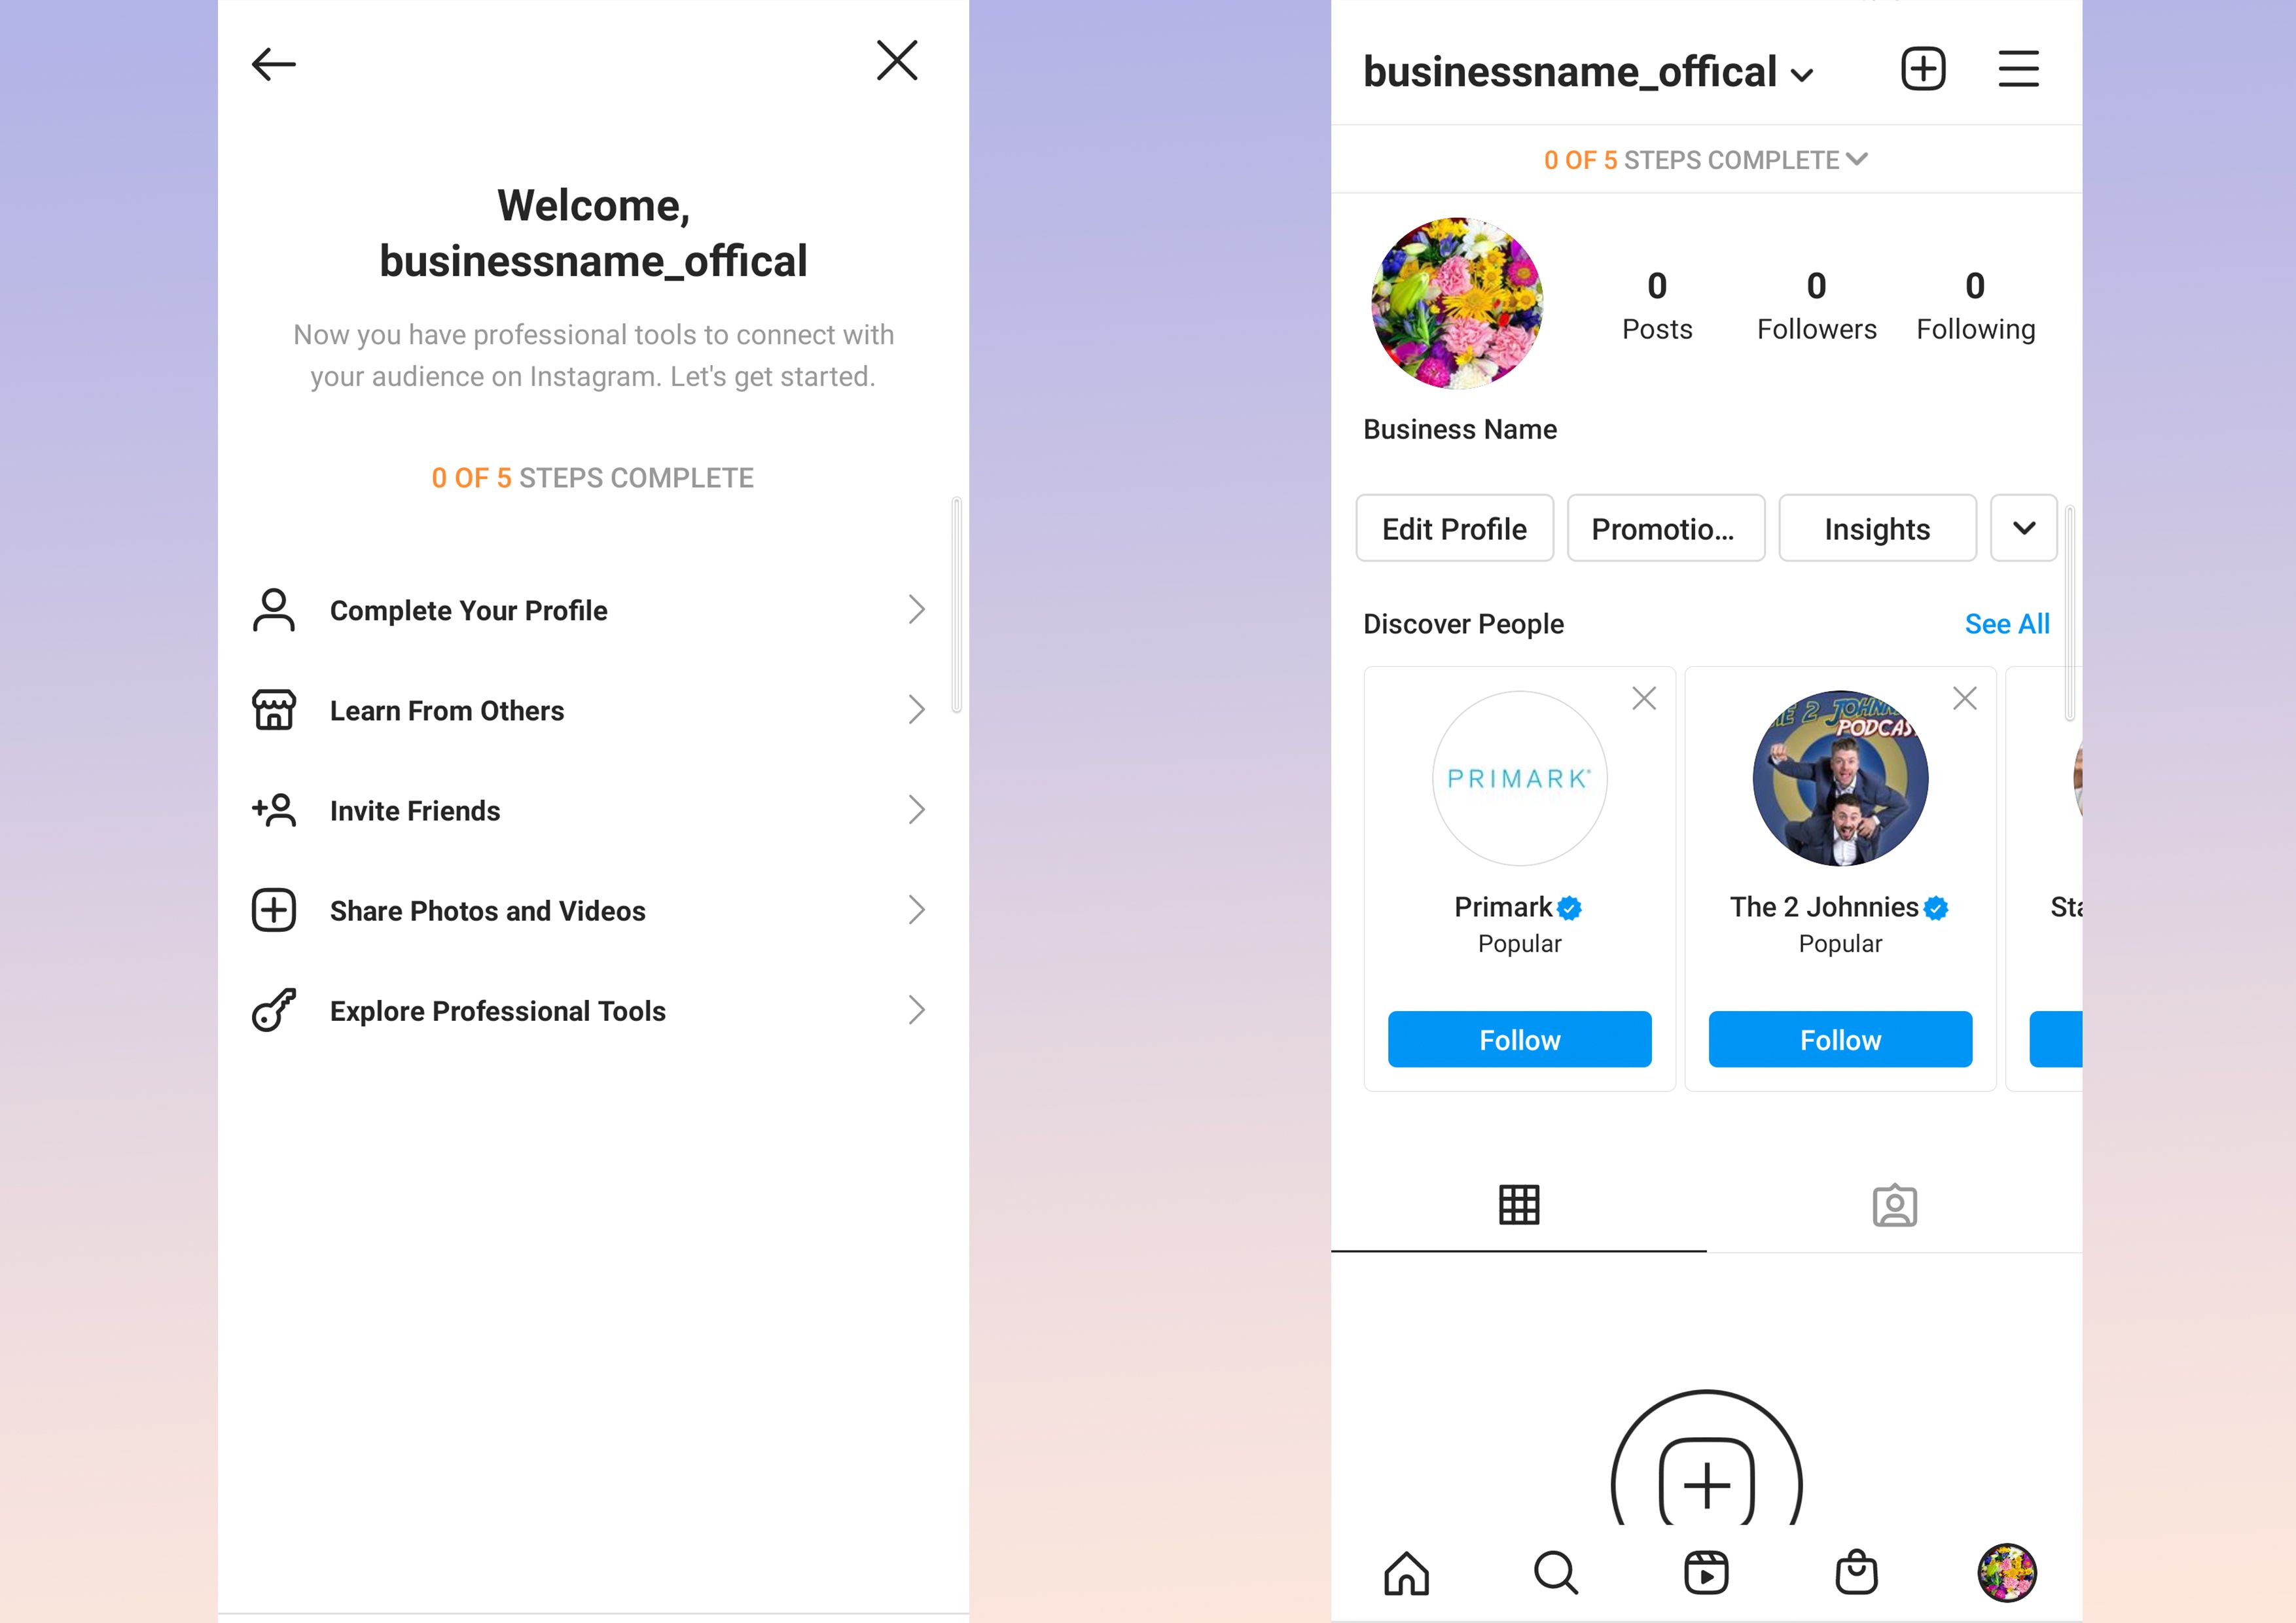 Screenshots of the step by step guide to setting up your professional account - How to use Instagram for business: Account creation and best practices - Image